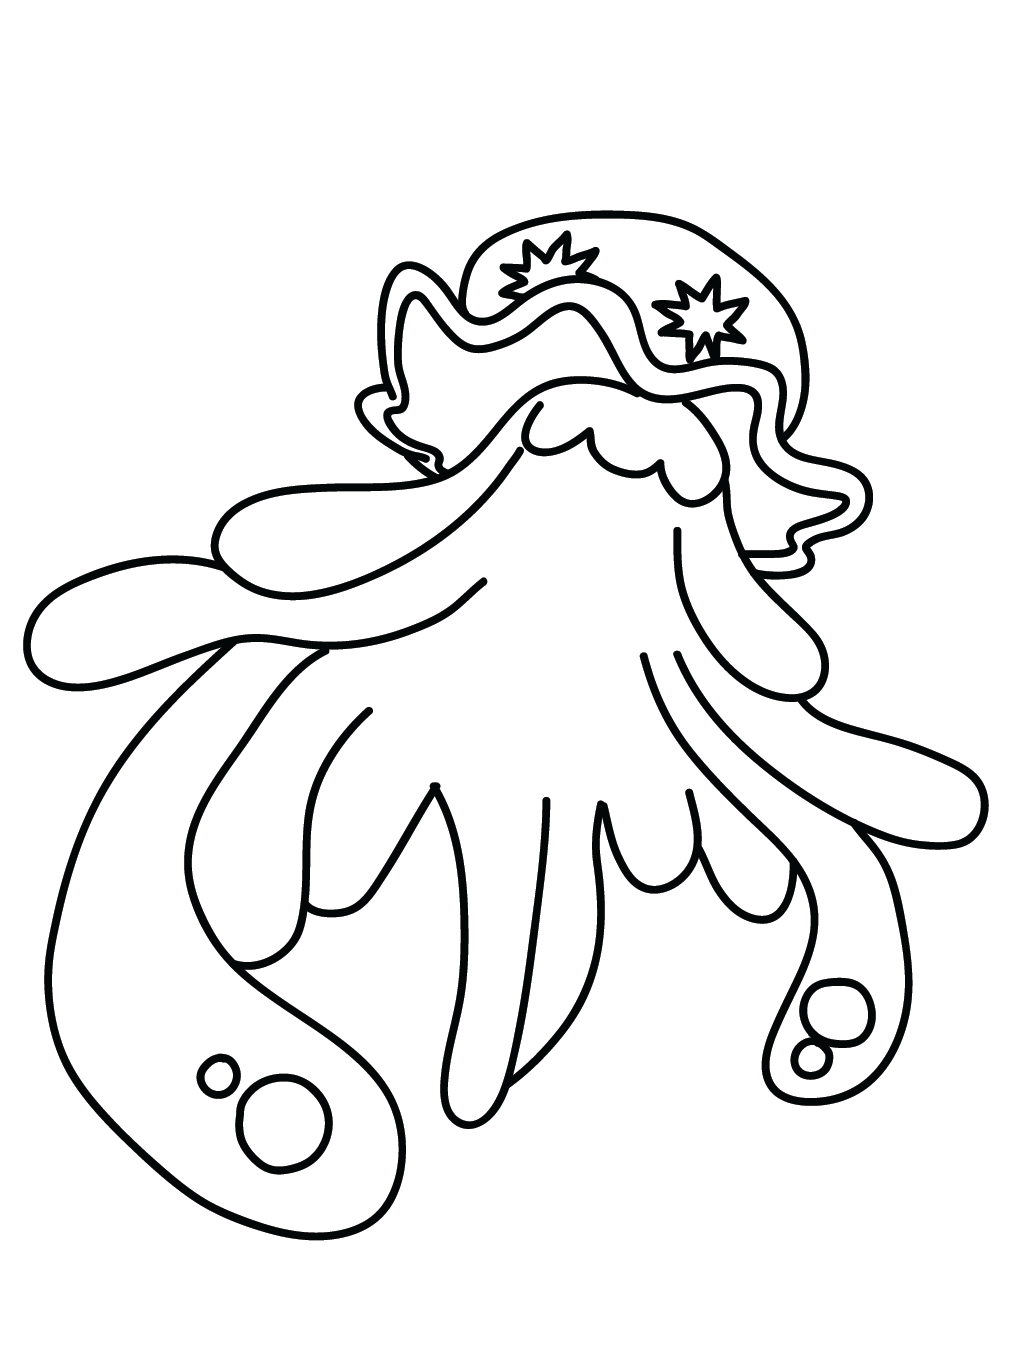 Pokemon Nihilego coloring pages free